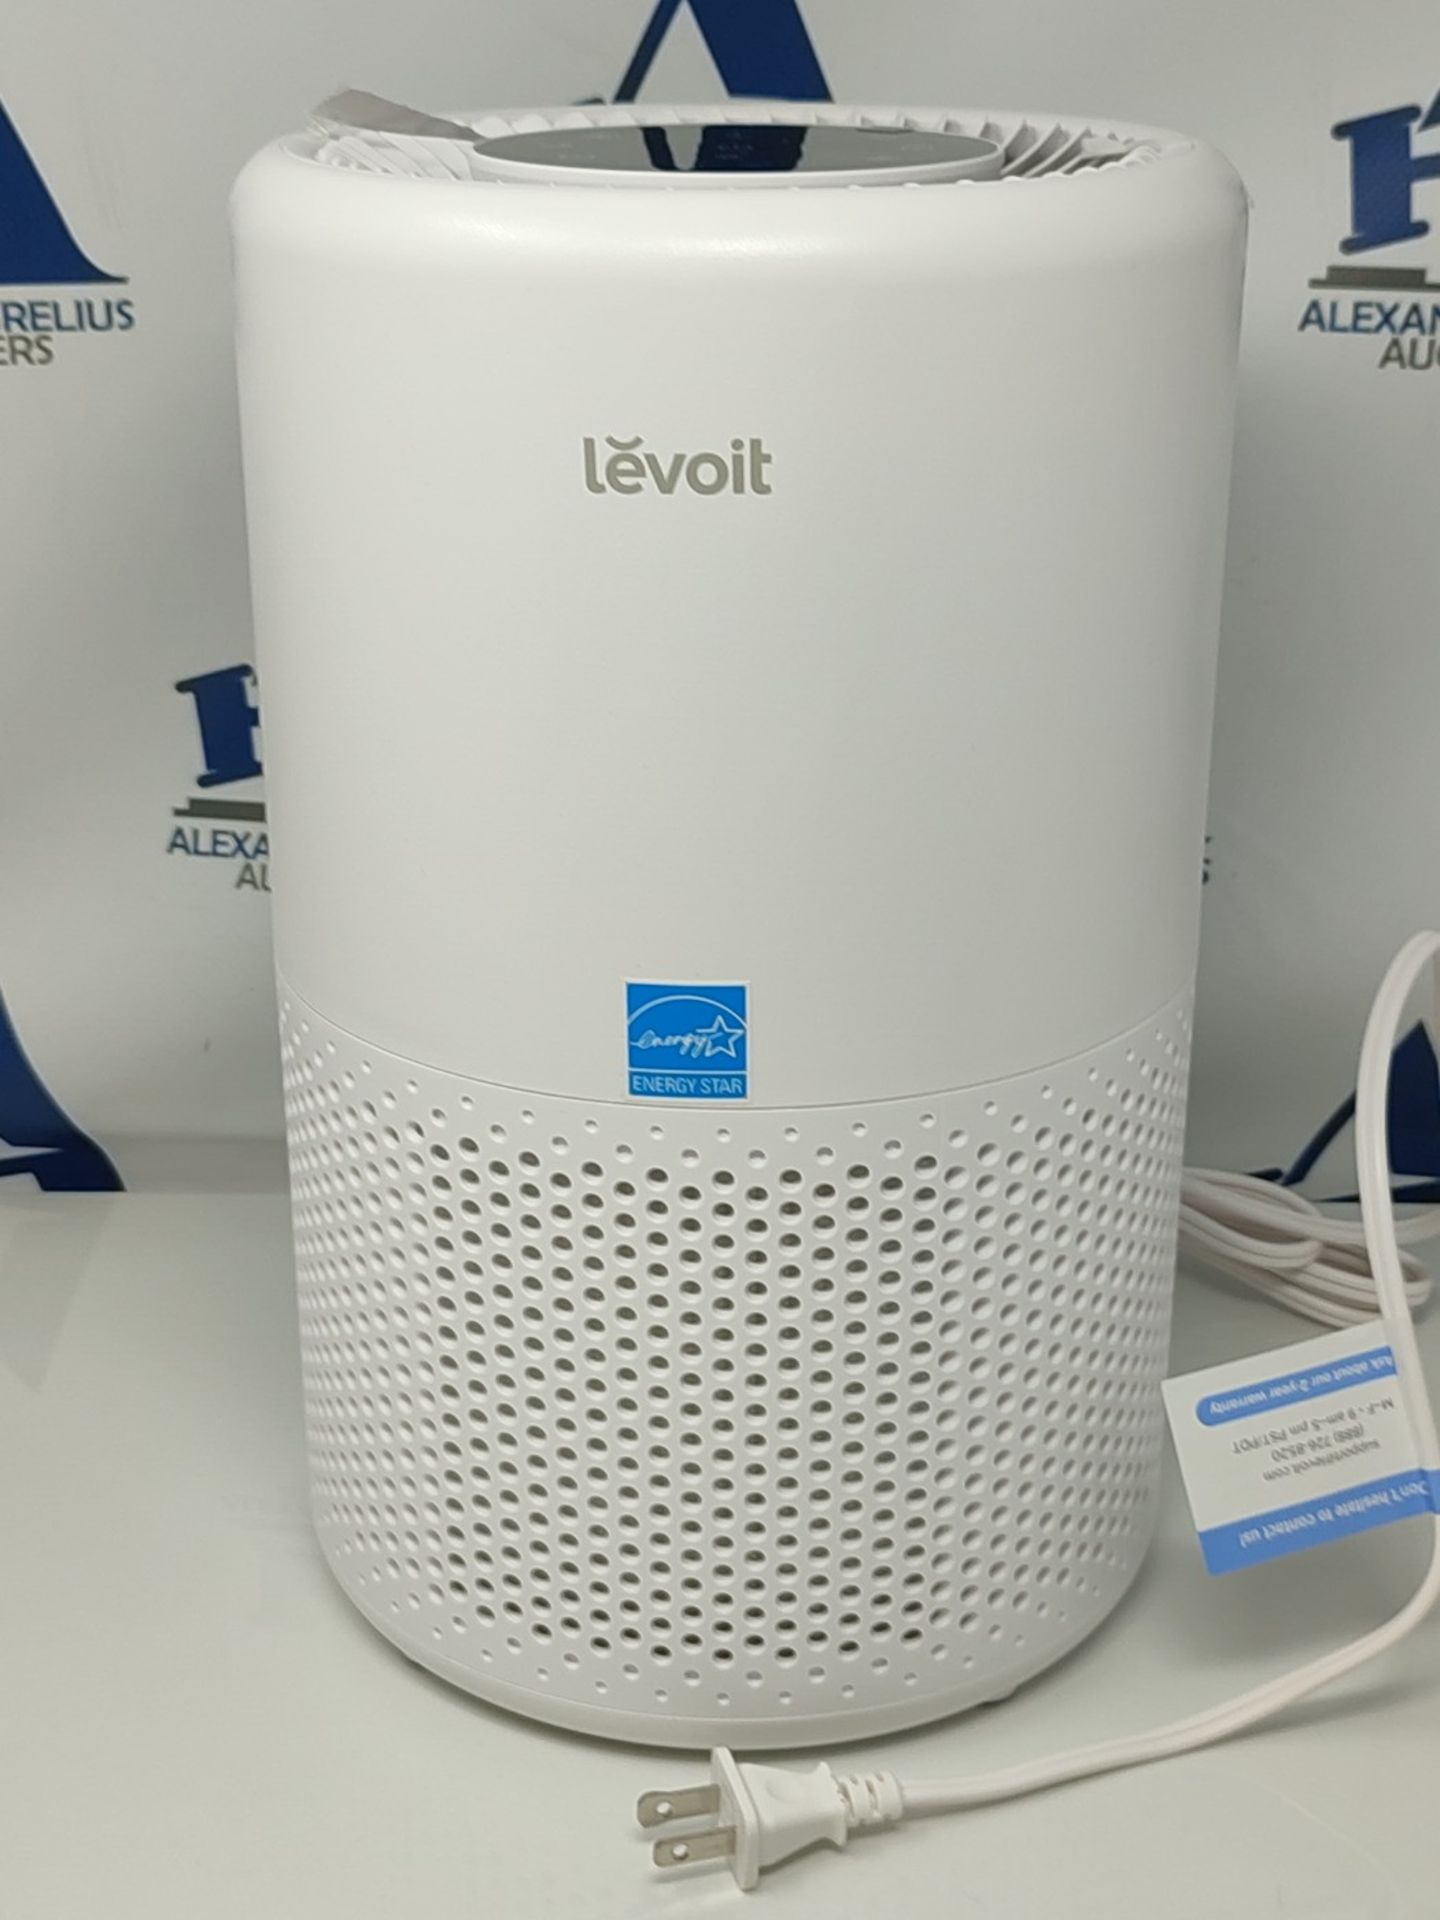 RRP £89.00 LEVOIT Smart WiFi Air Purifier for Home, Alexa Enabled H13 HEPA Filter, CADR 170m³/h, - Image 3 of 3